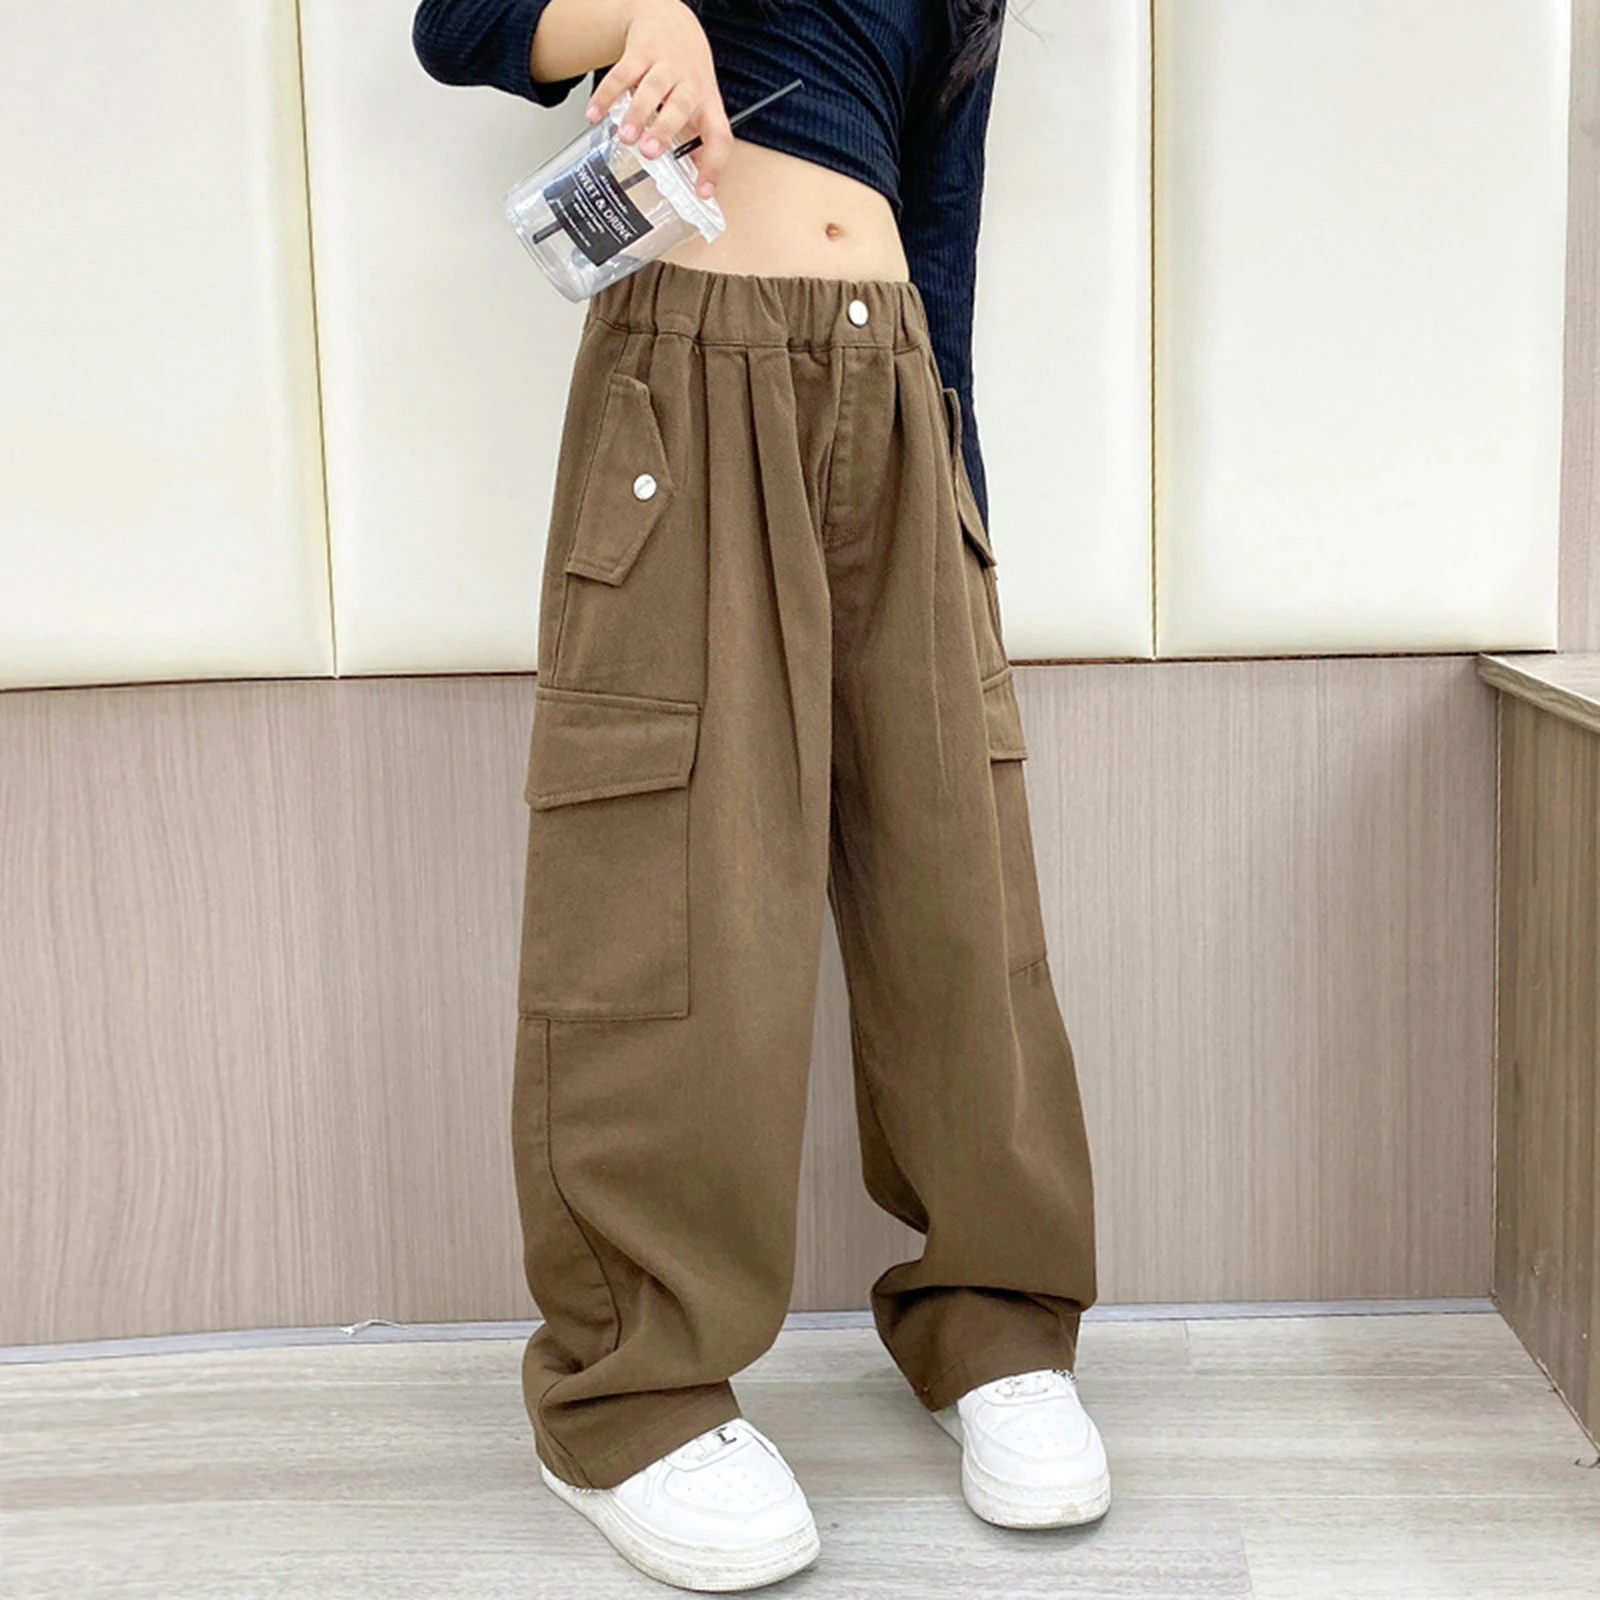 Fashion Cargo Pants for Teen Girls Cool Trousers With Belt Loose Style Kids  Cotton Sport Running Pants For Teens Girl 5-14 Years